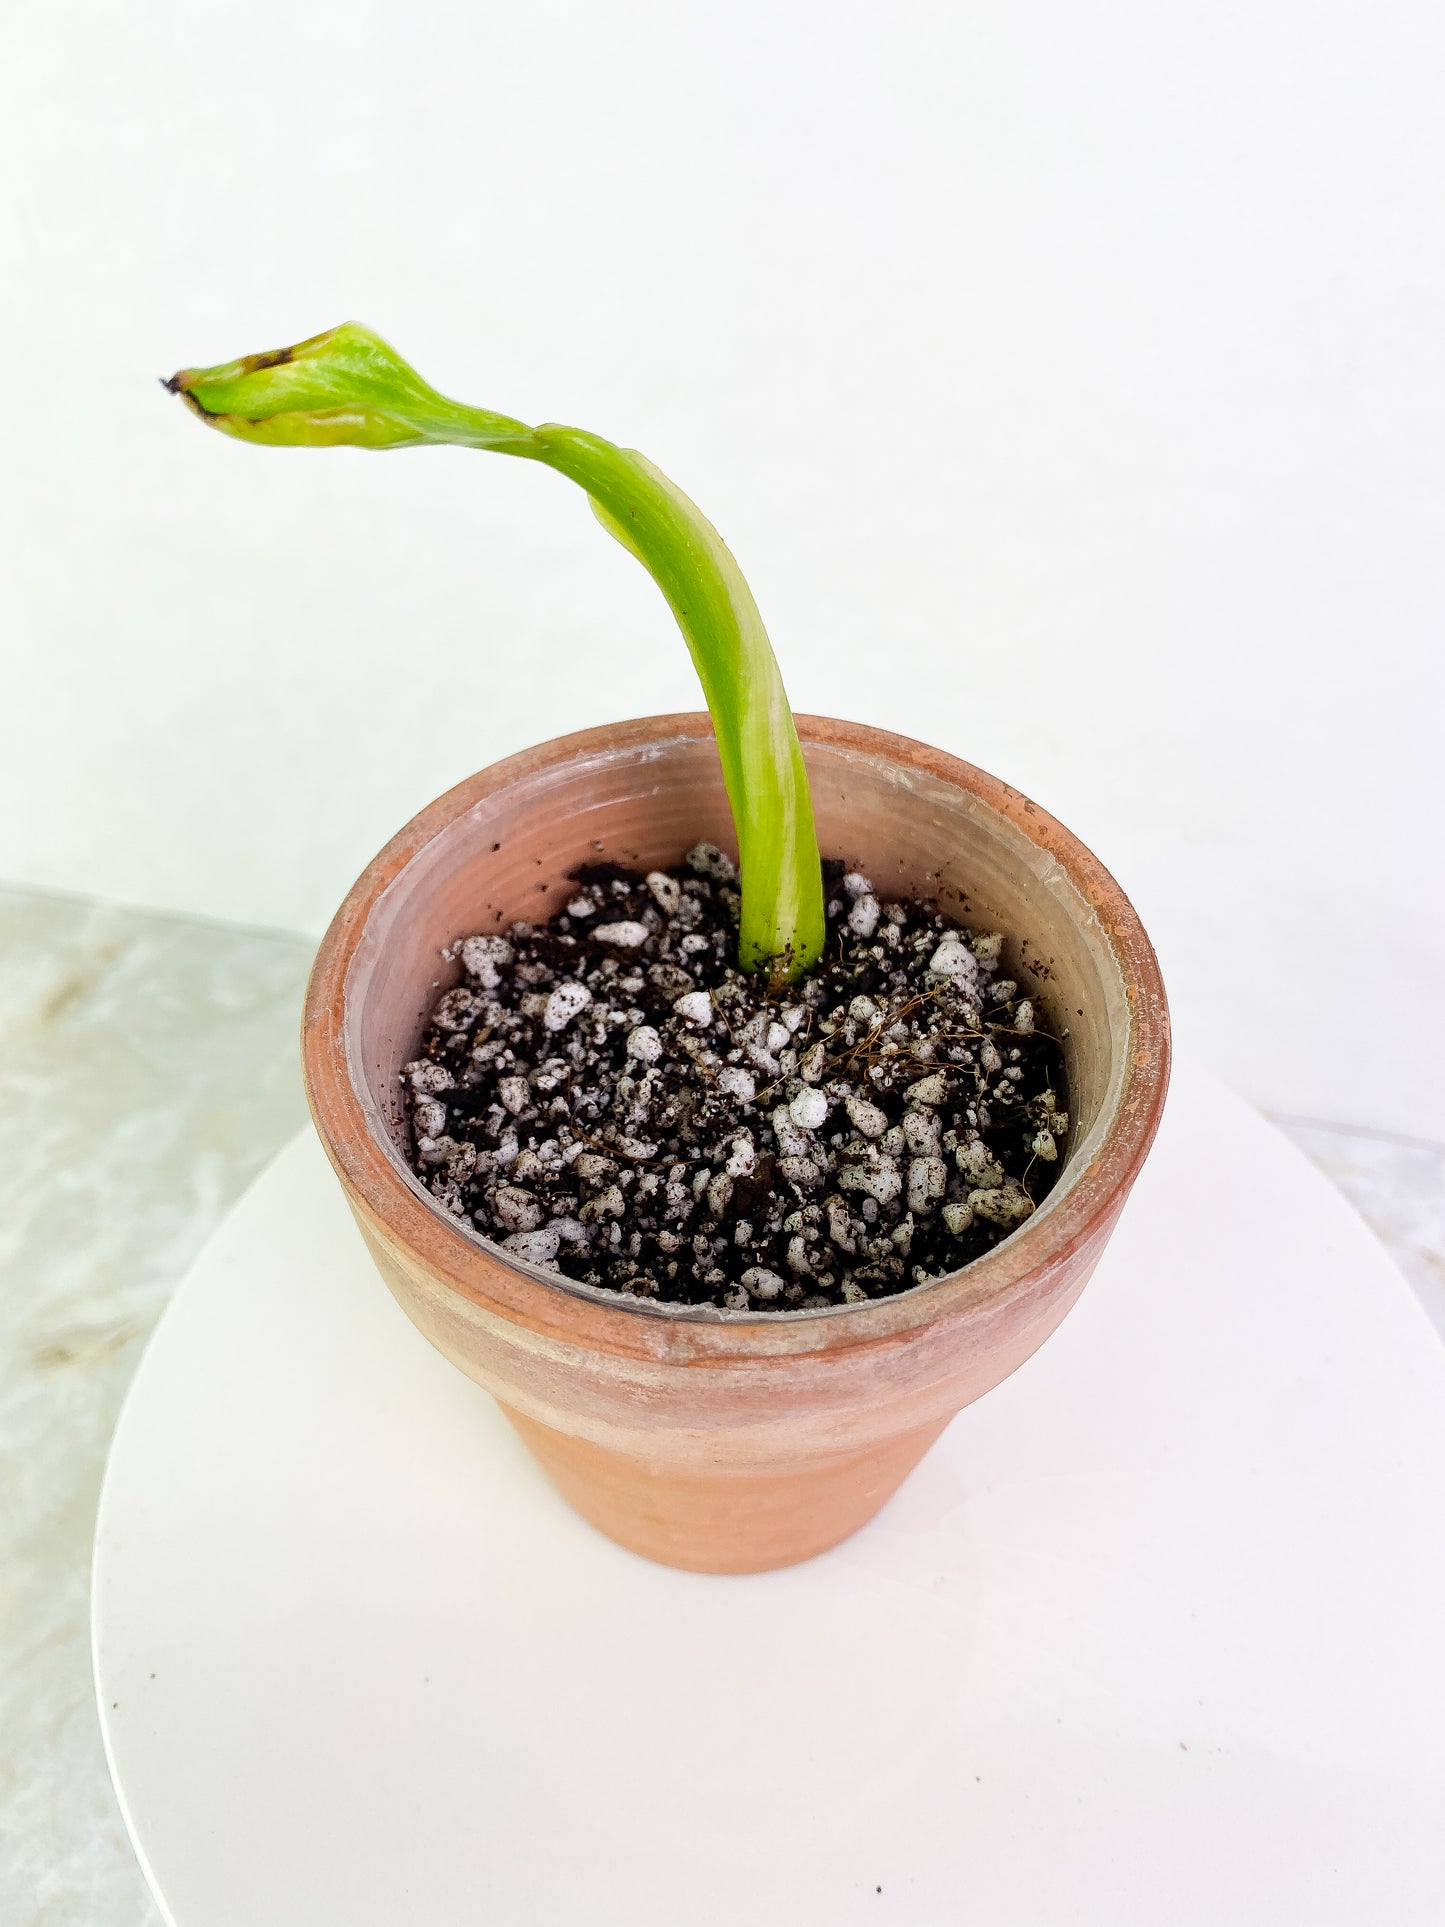 Philodendron Jose Buono sprout slightly rooted